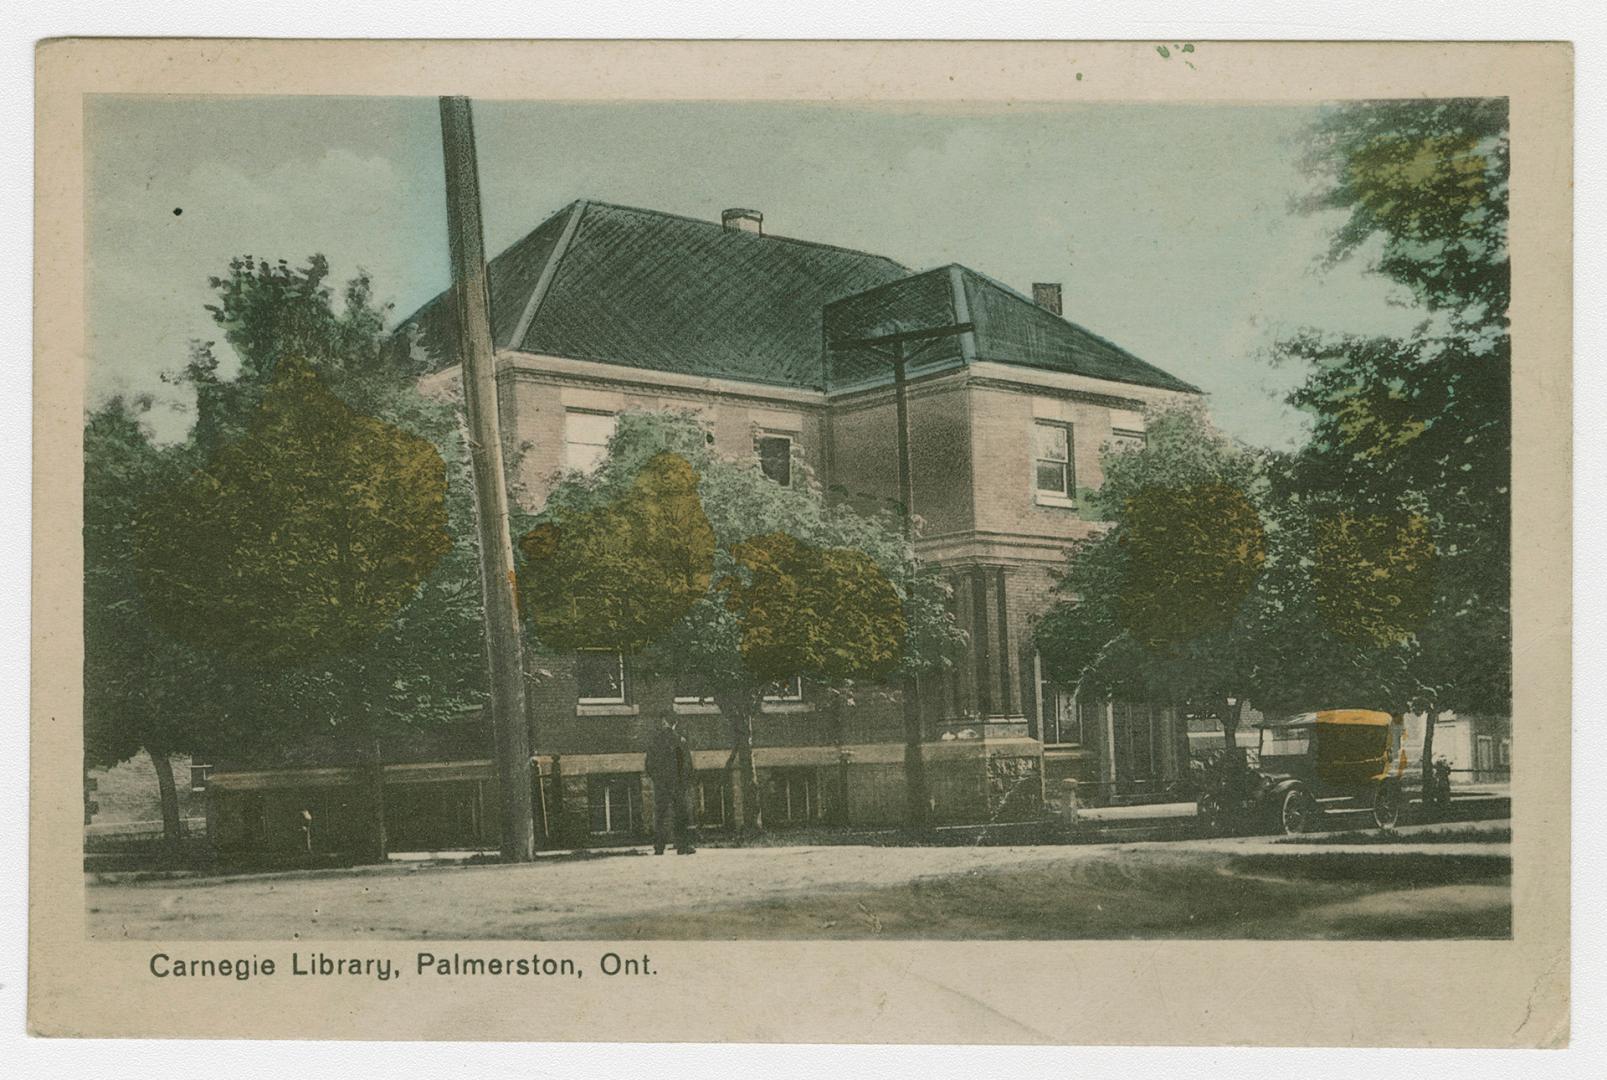 Picture of library building on treed street.